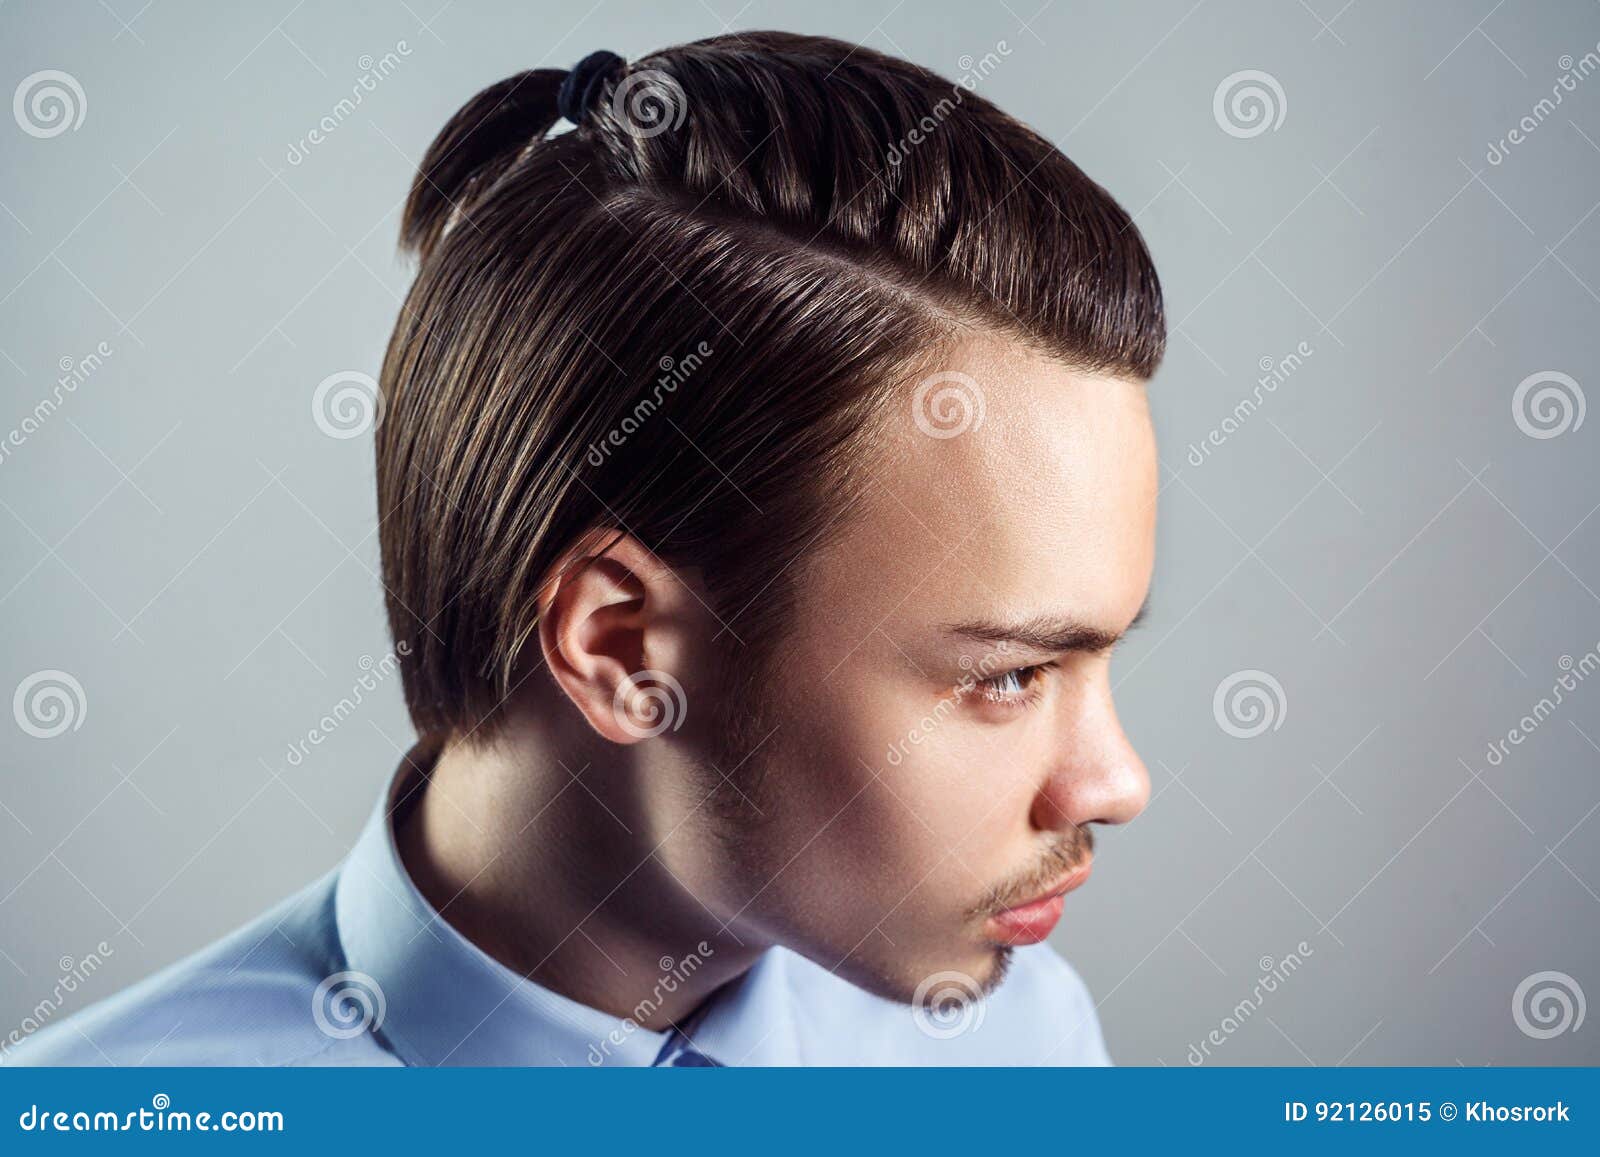 Side View Portrait of Young Man with Top Knot Hairstyle. Stock Image -  Image of face, knot: 92126015